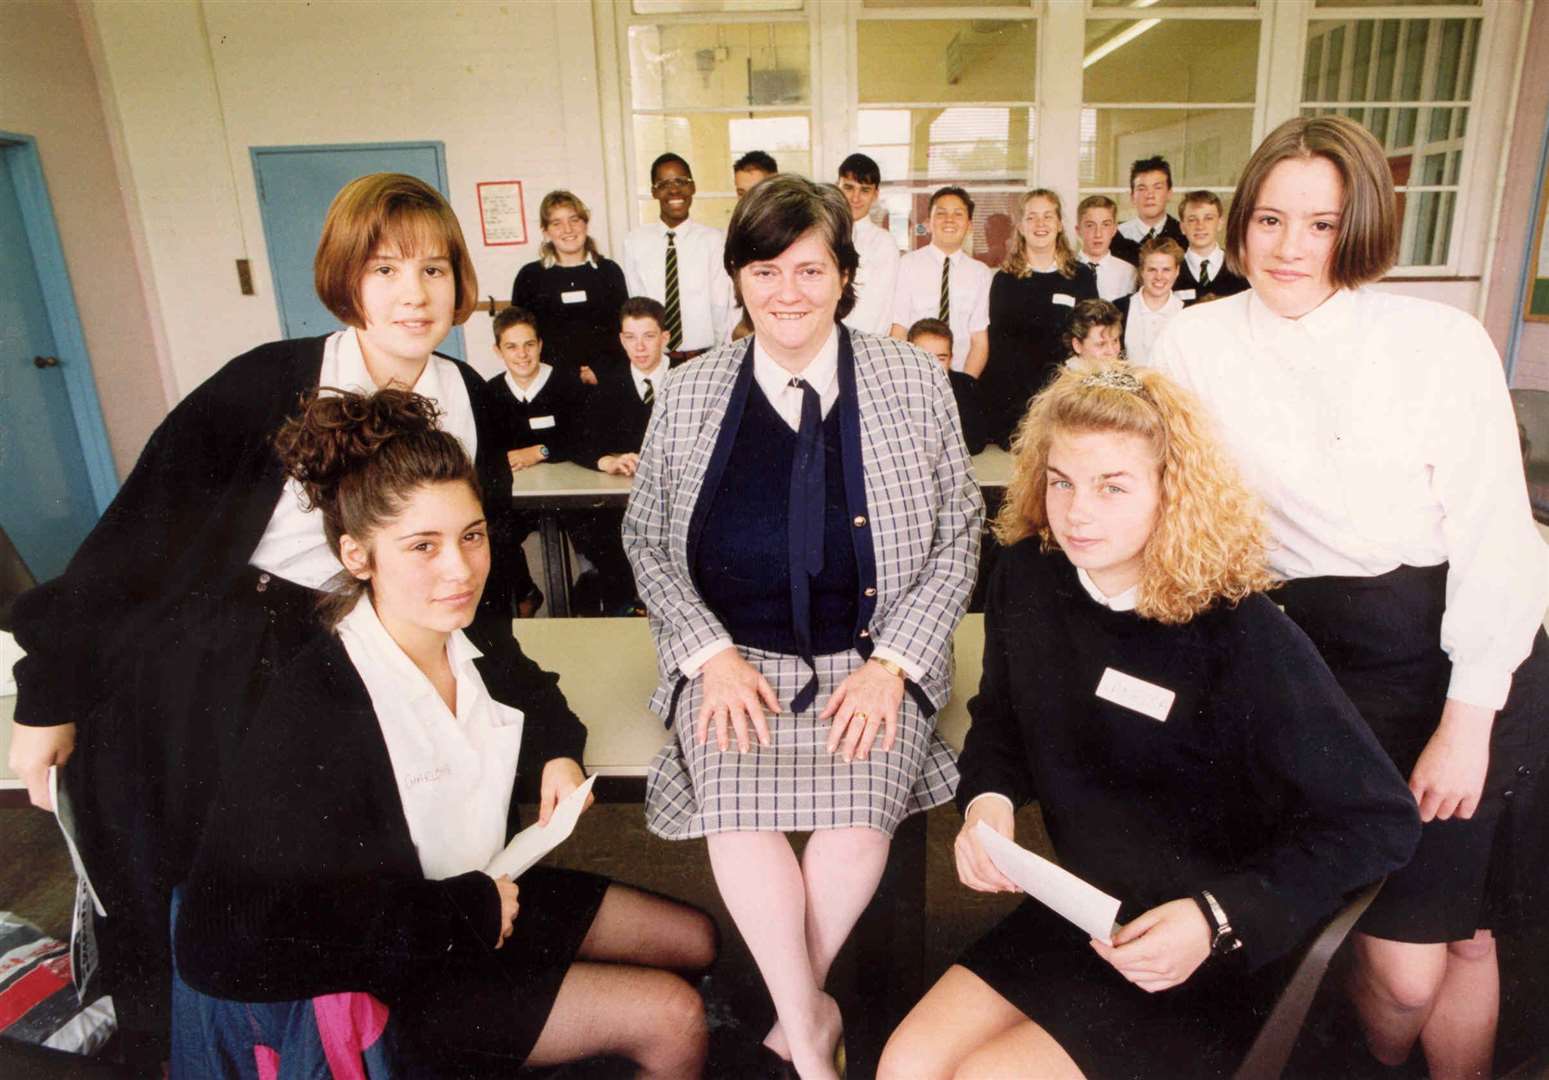 Ann Widdecombe, MP for Maidstone, with pupils of Oldborough Manor School on June 14, 1991